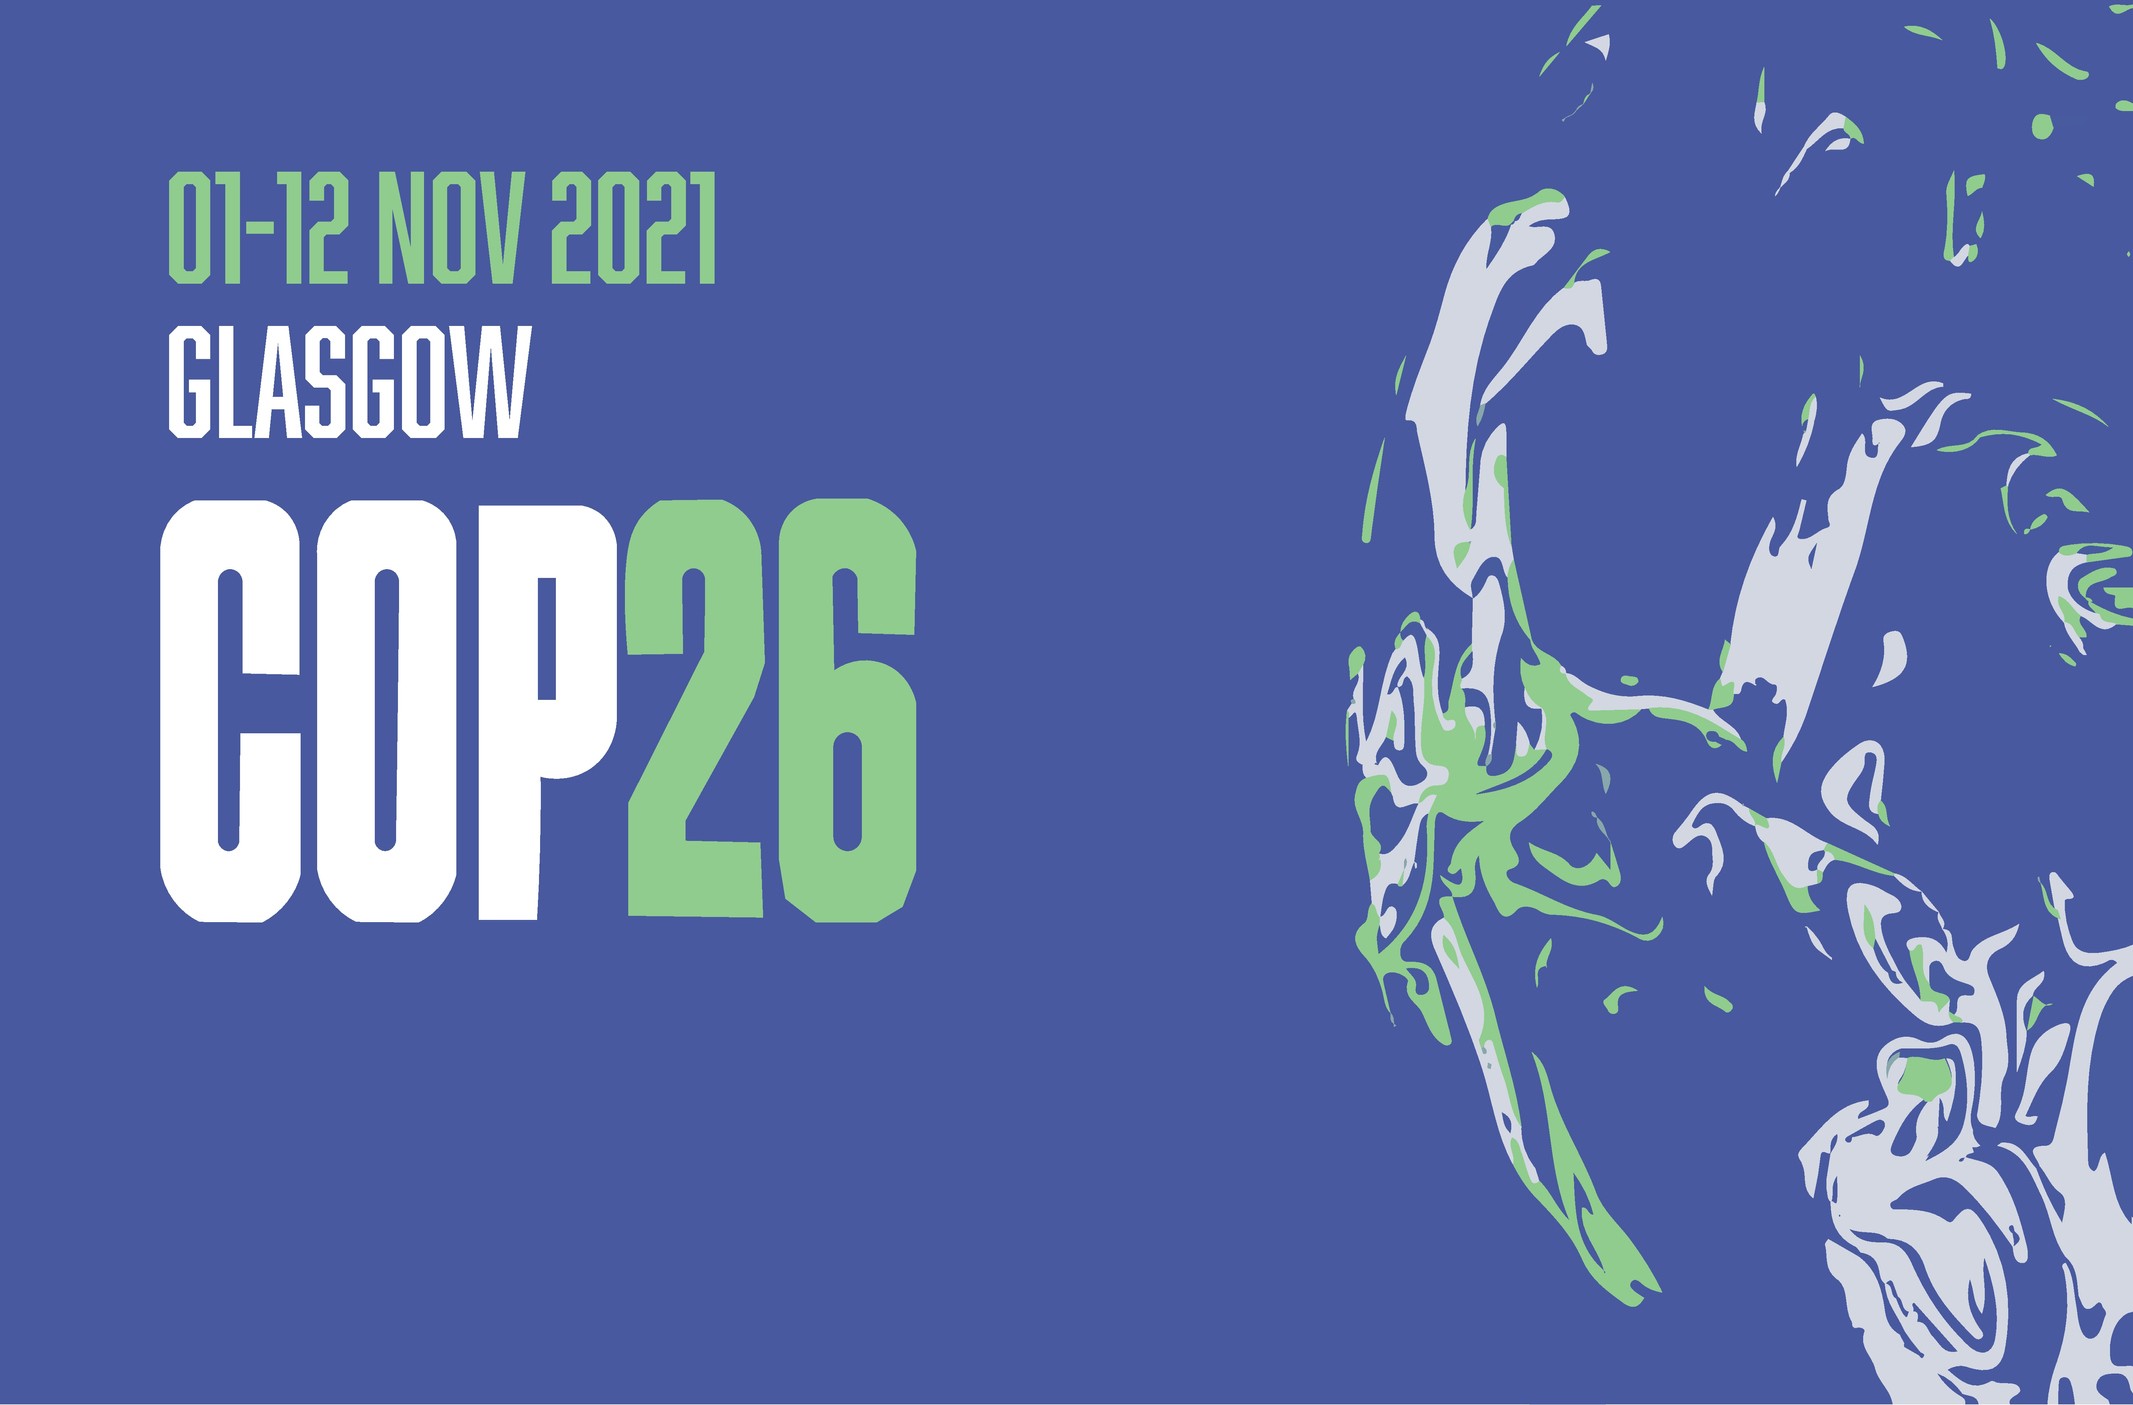 What can we expect from the Glasgow COP26?